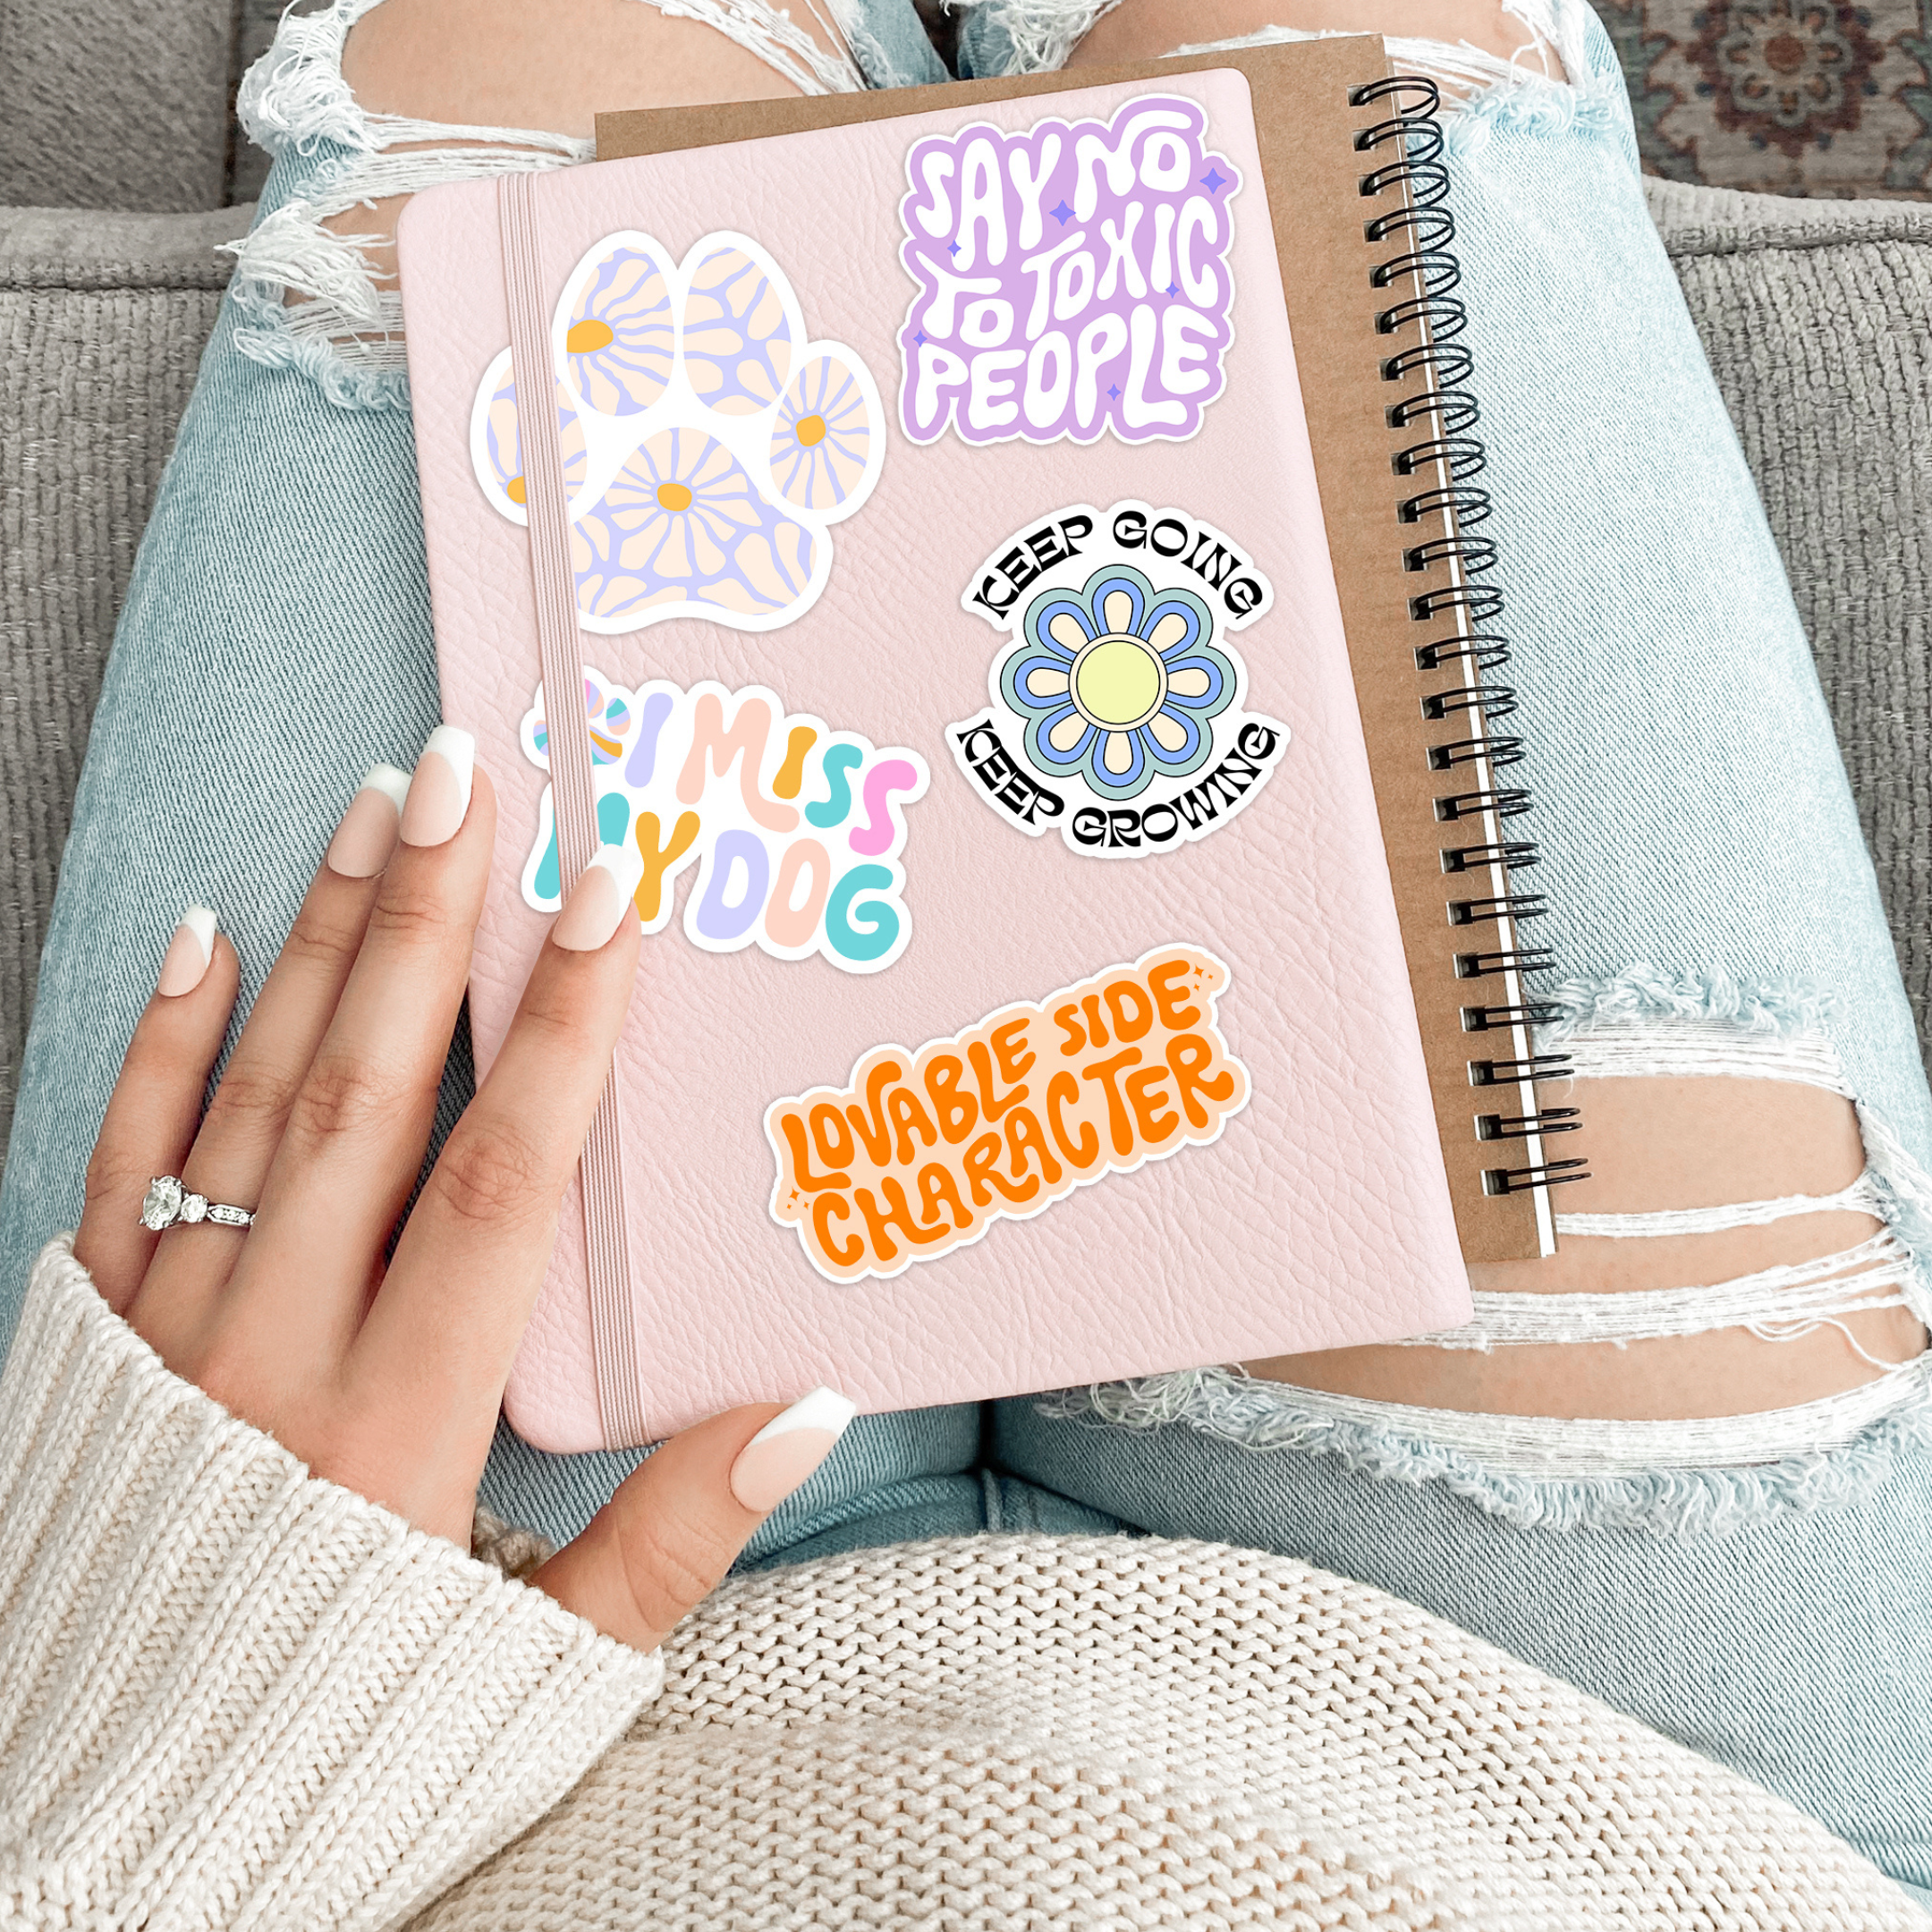 Shop Books Are My Happy Place - Waterproof Vinyl Sticker-Stickers at Ruby Joy Boutique, a Women's Clothing Store in Pickerington, Ohio